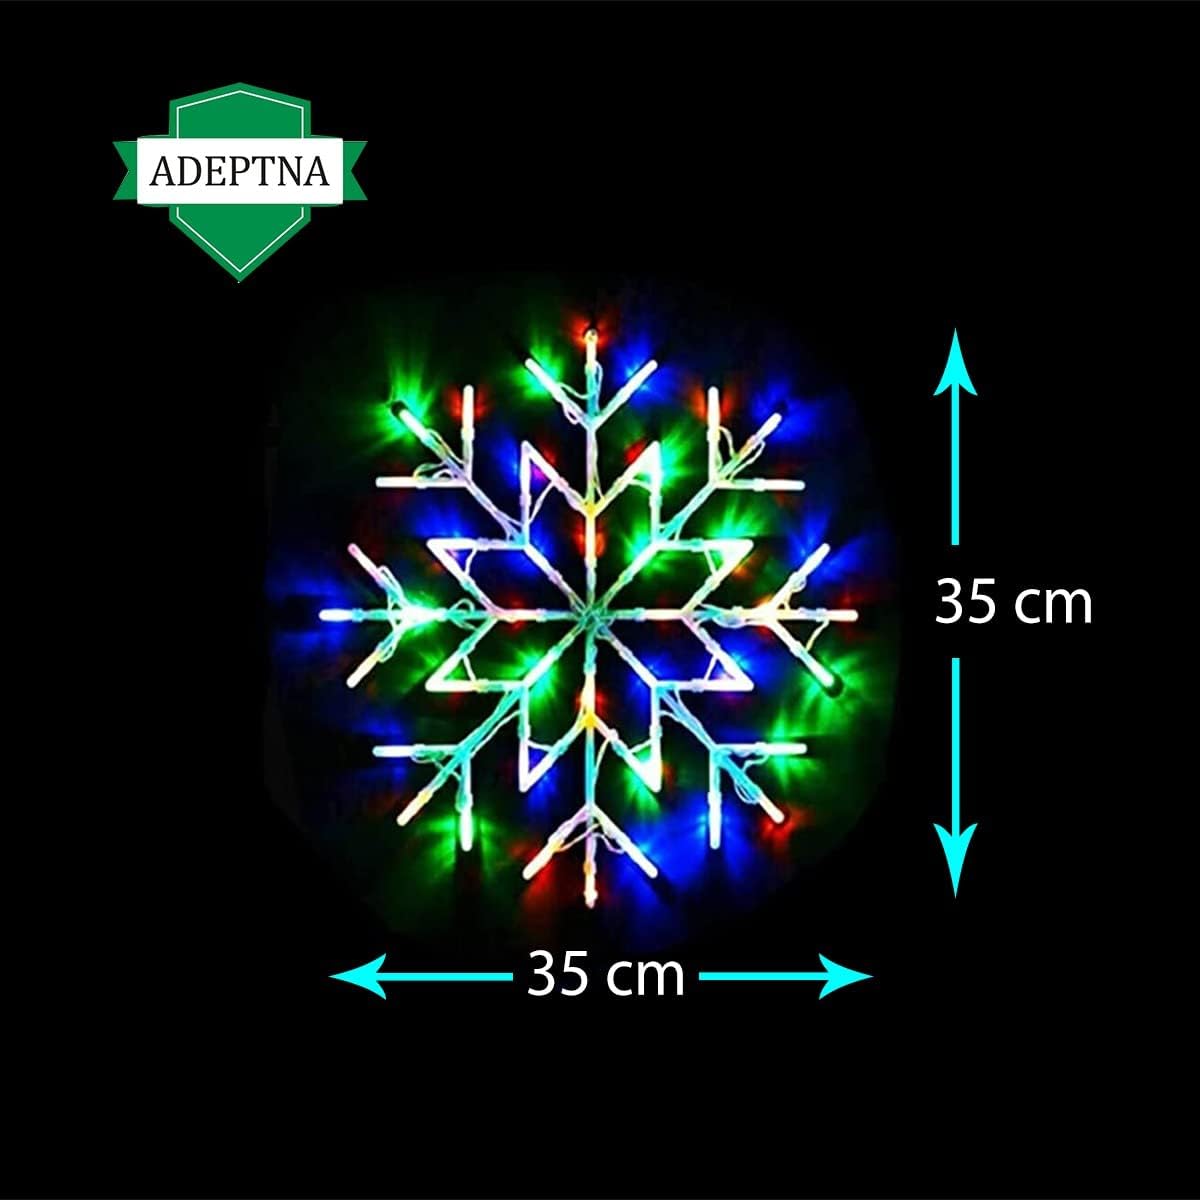 ADEPTNA 50 LED Snowflake Christmas Light - Flashing Silhouette Home Window Xmas Festive Party Decoration Lights Home Office Indoor (Multi-Colour)